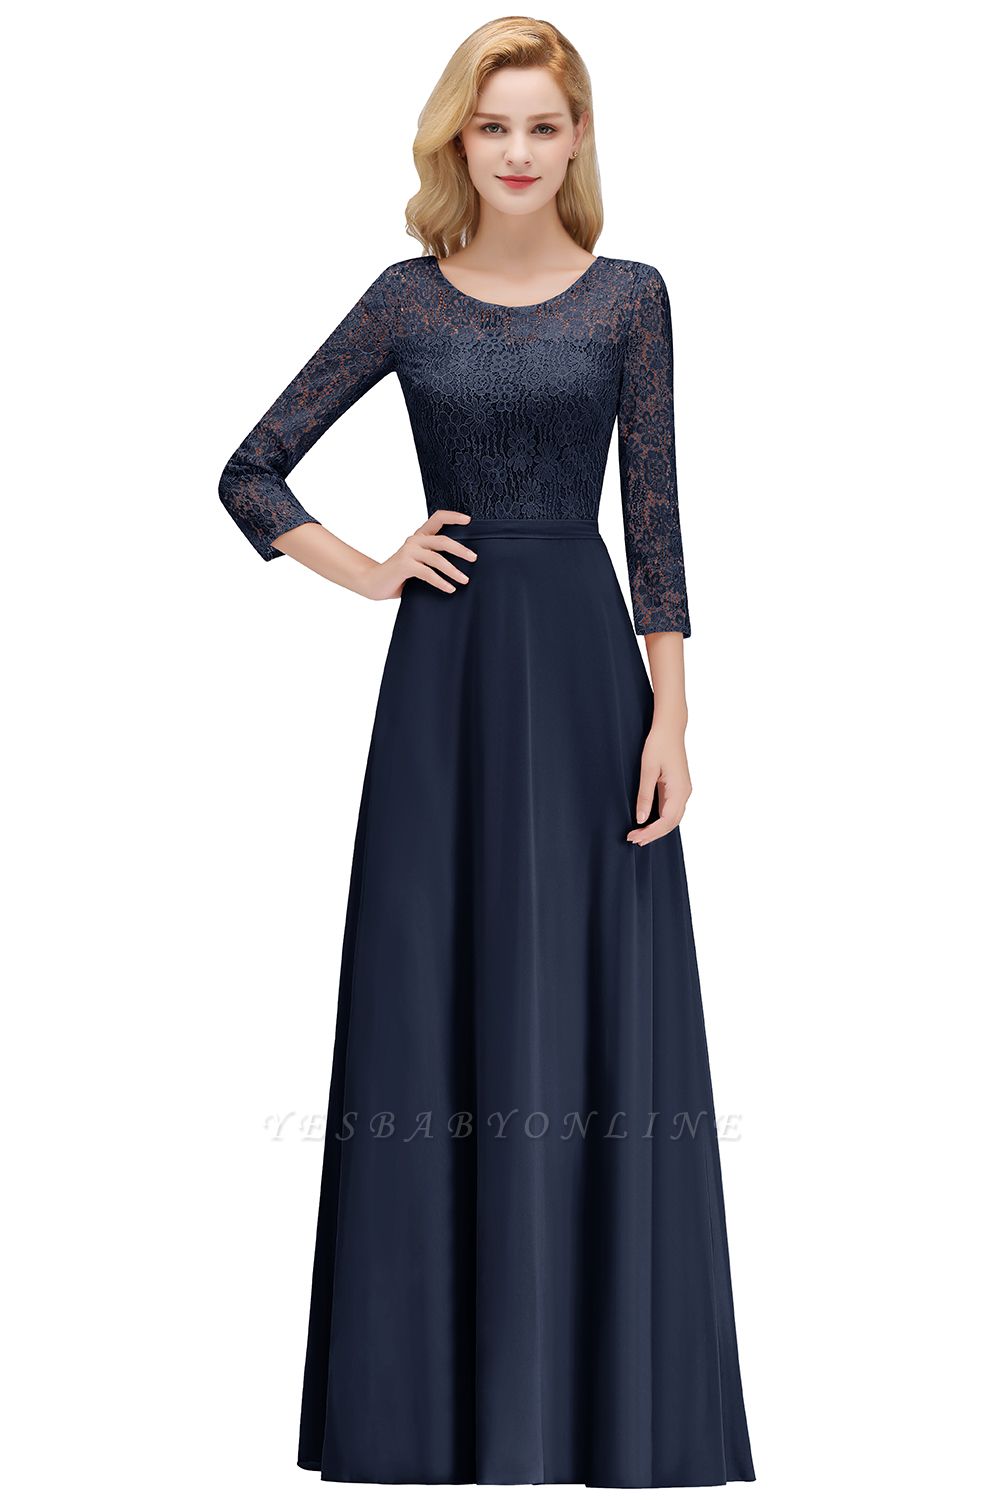 Simple Chiffon A-Line Bridesmaid Dresses | Scoop 3/4 Sleeves Lace Formal Prom Dresses